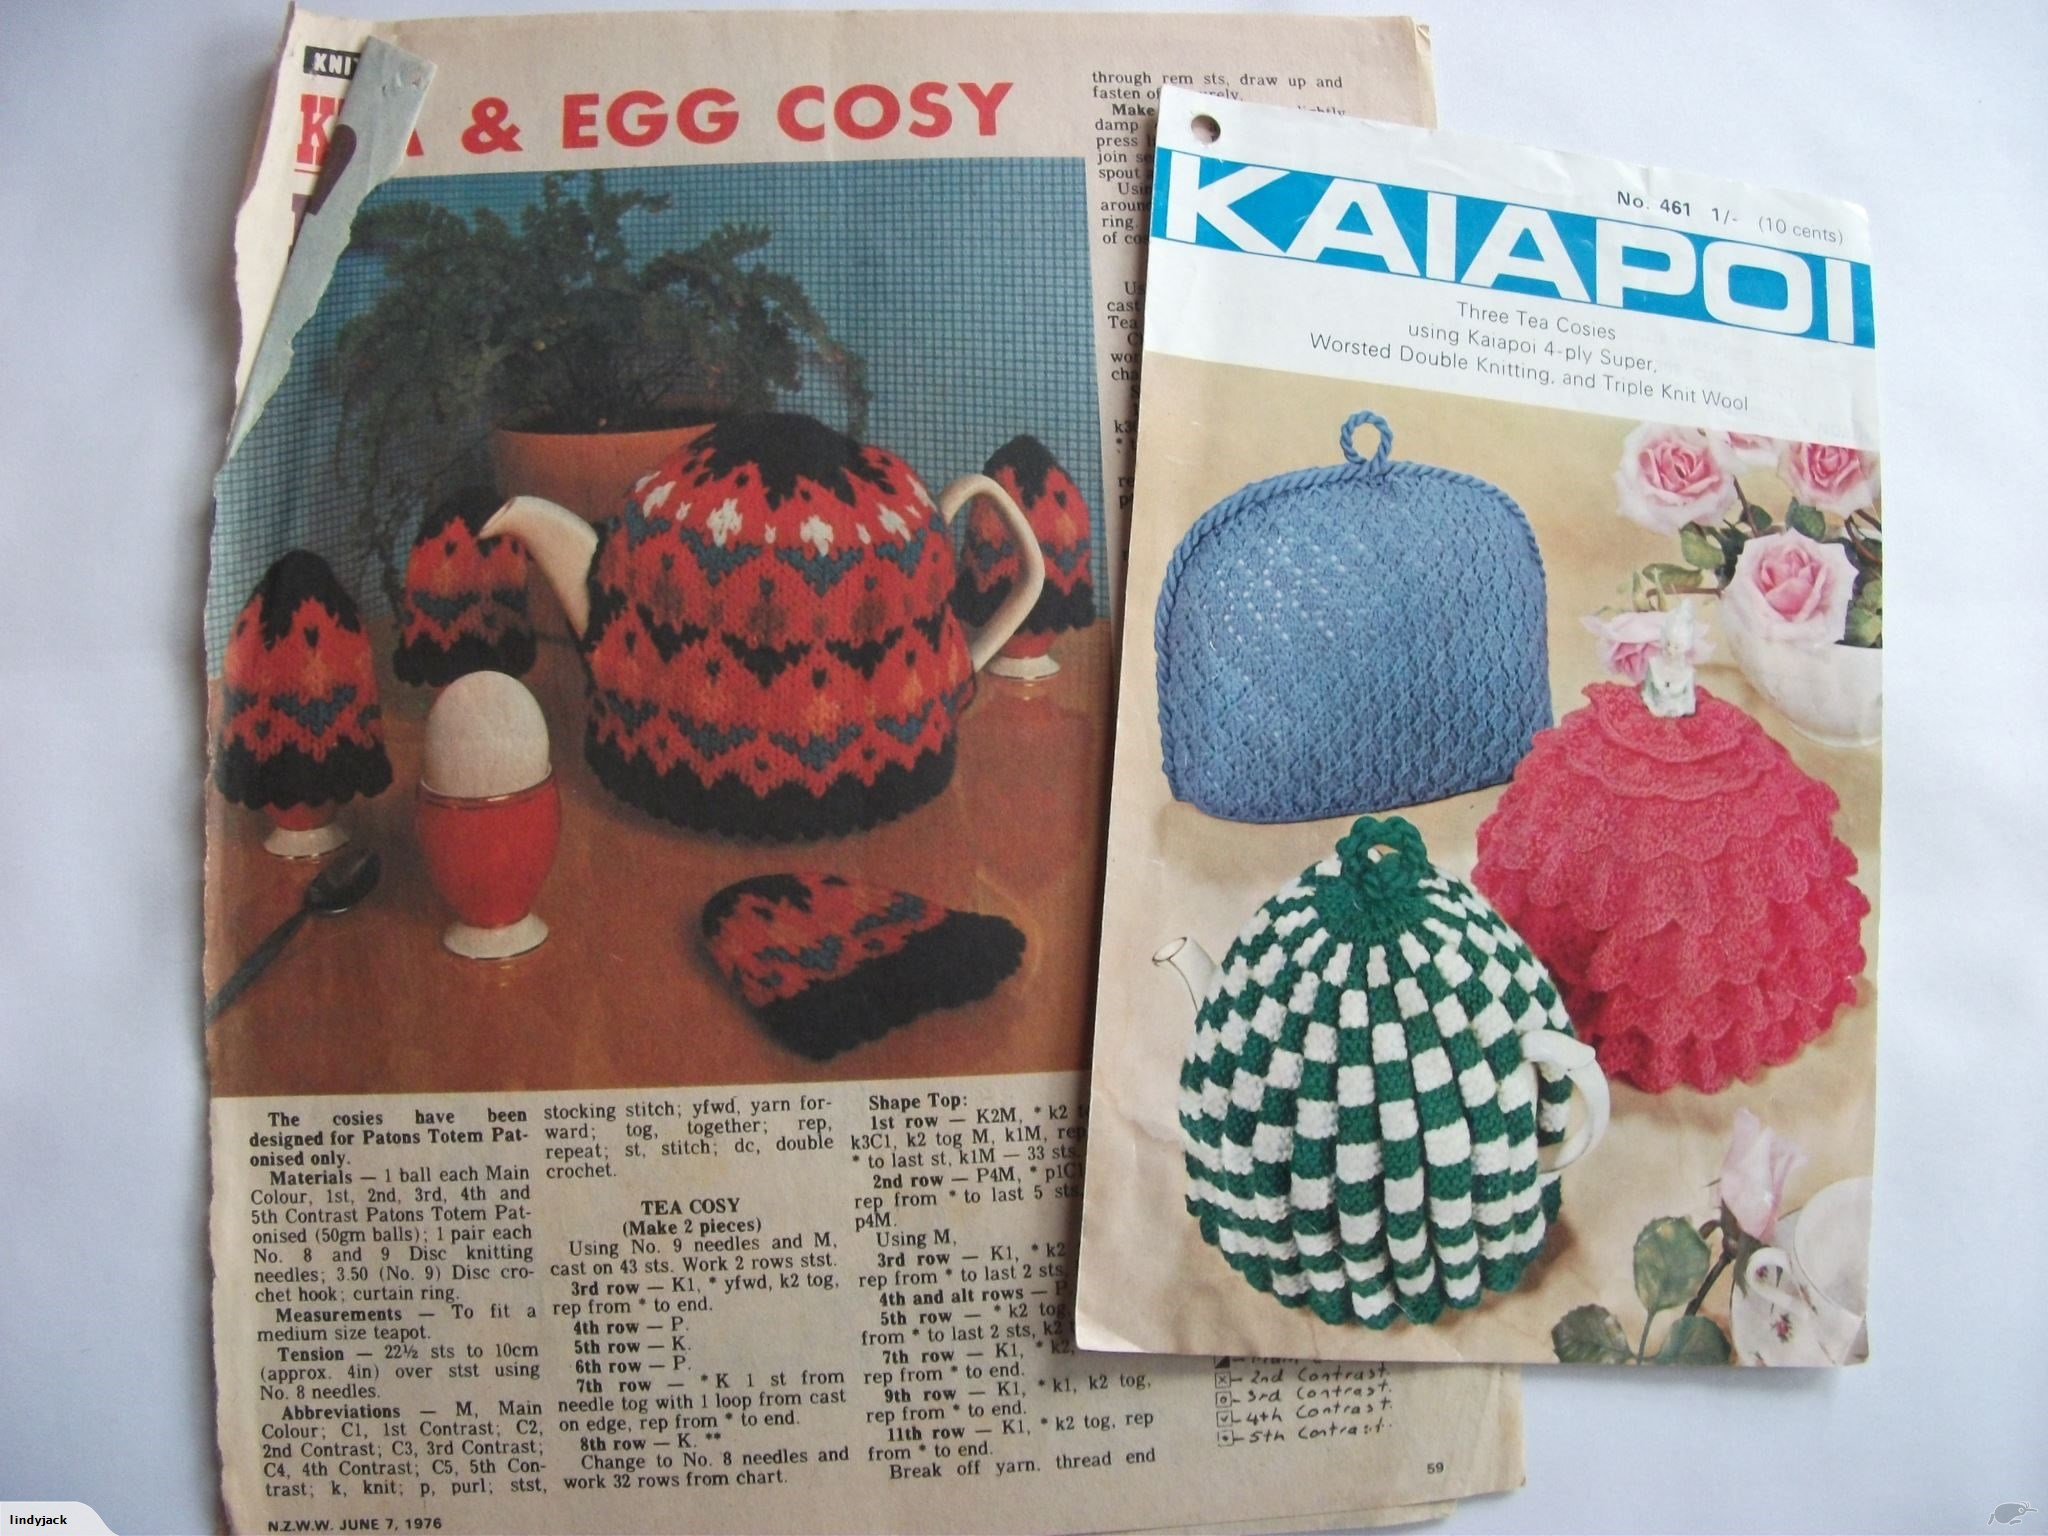 Tea Cosy Patterns To Knit Tea Egg Cosy Knitting Patterns